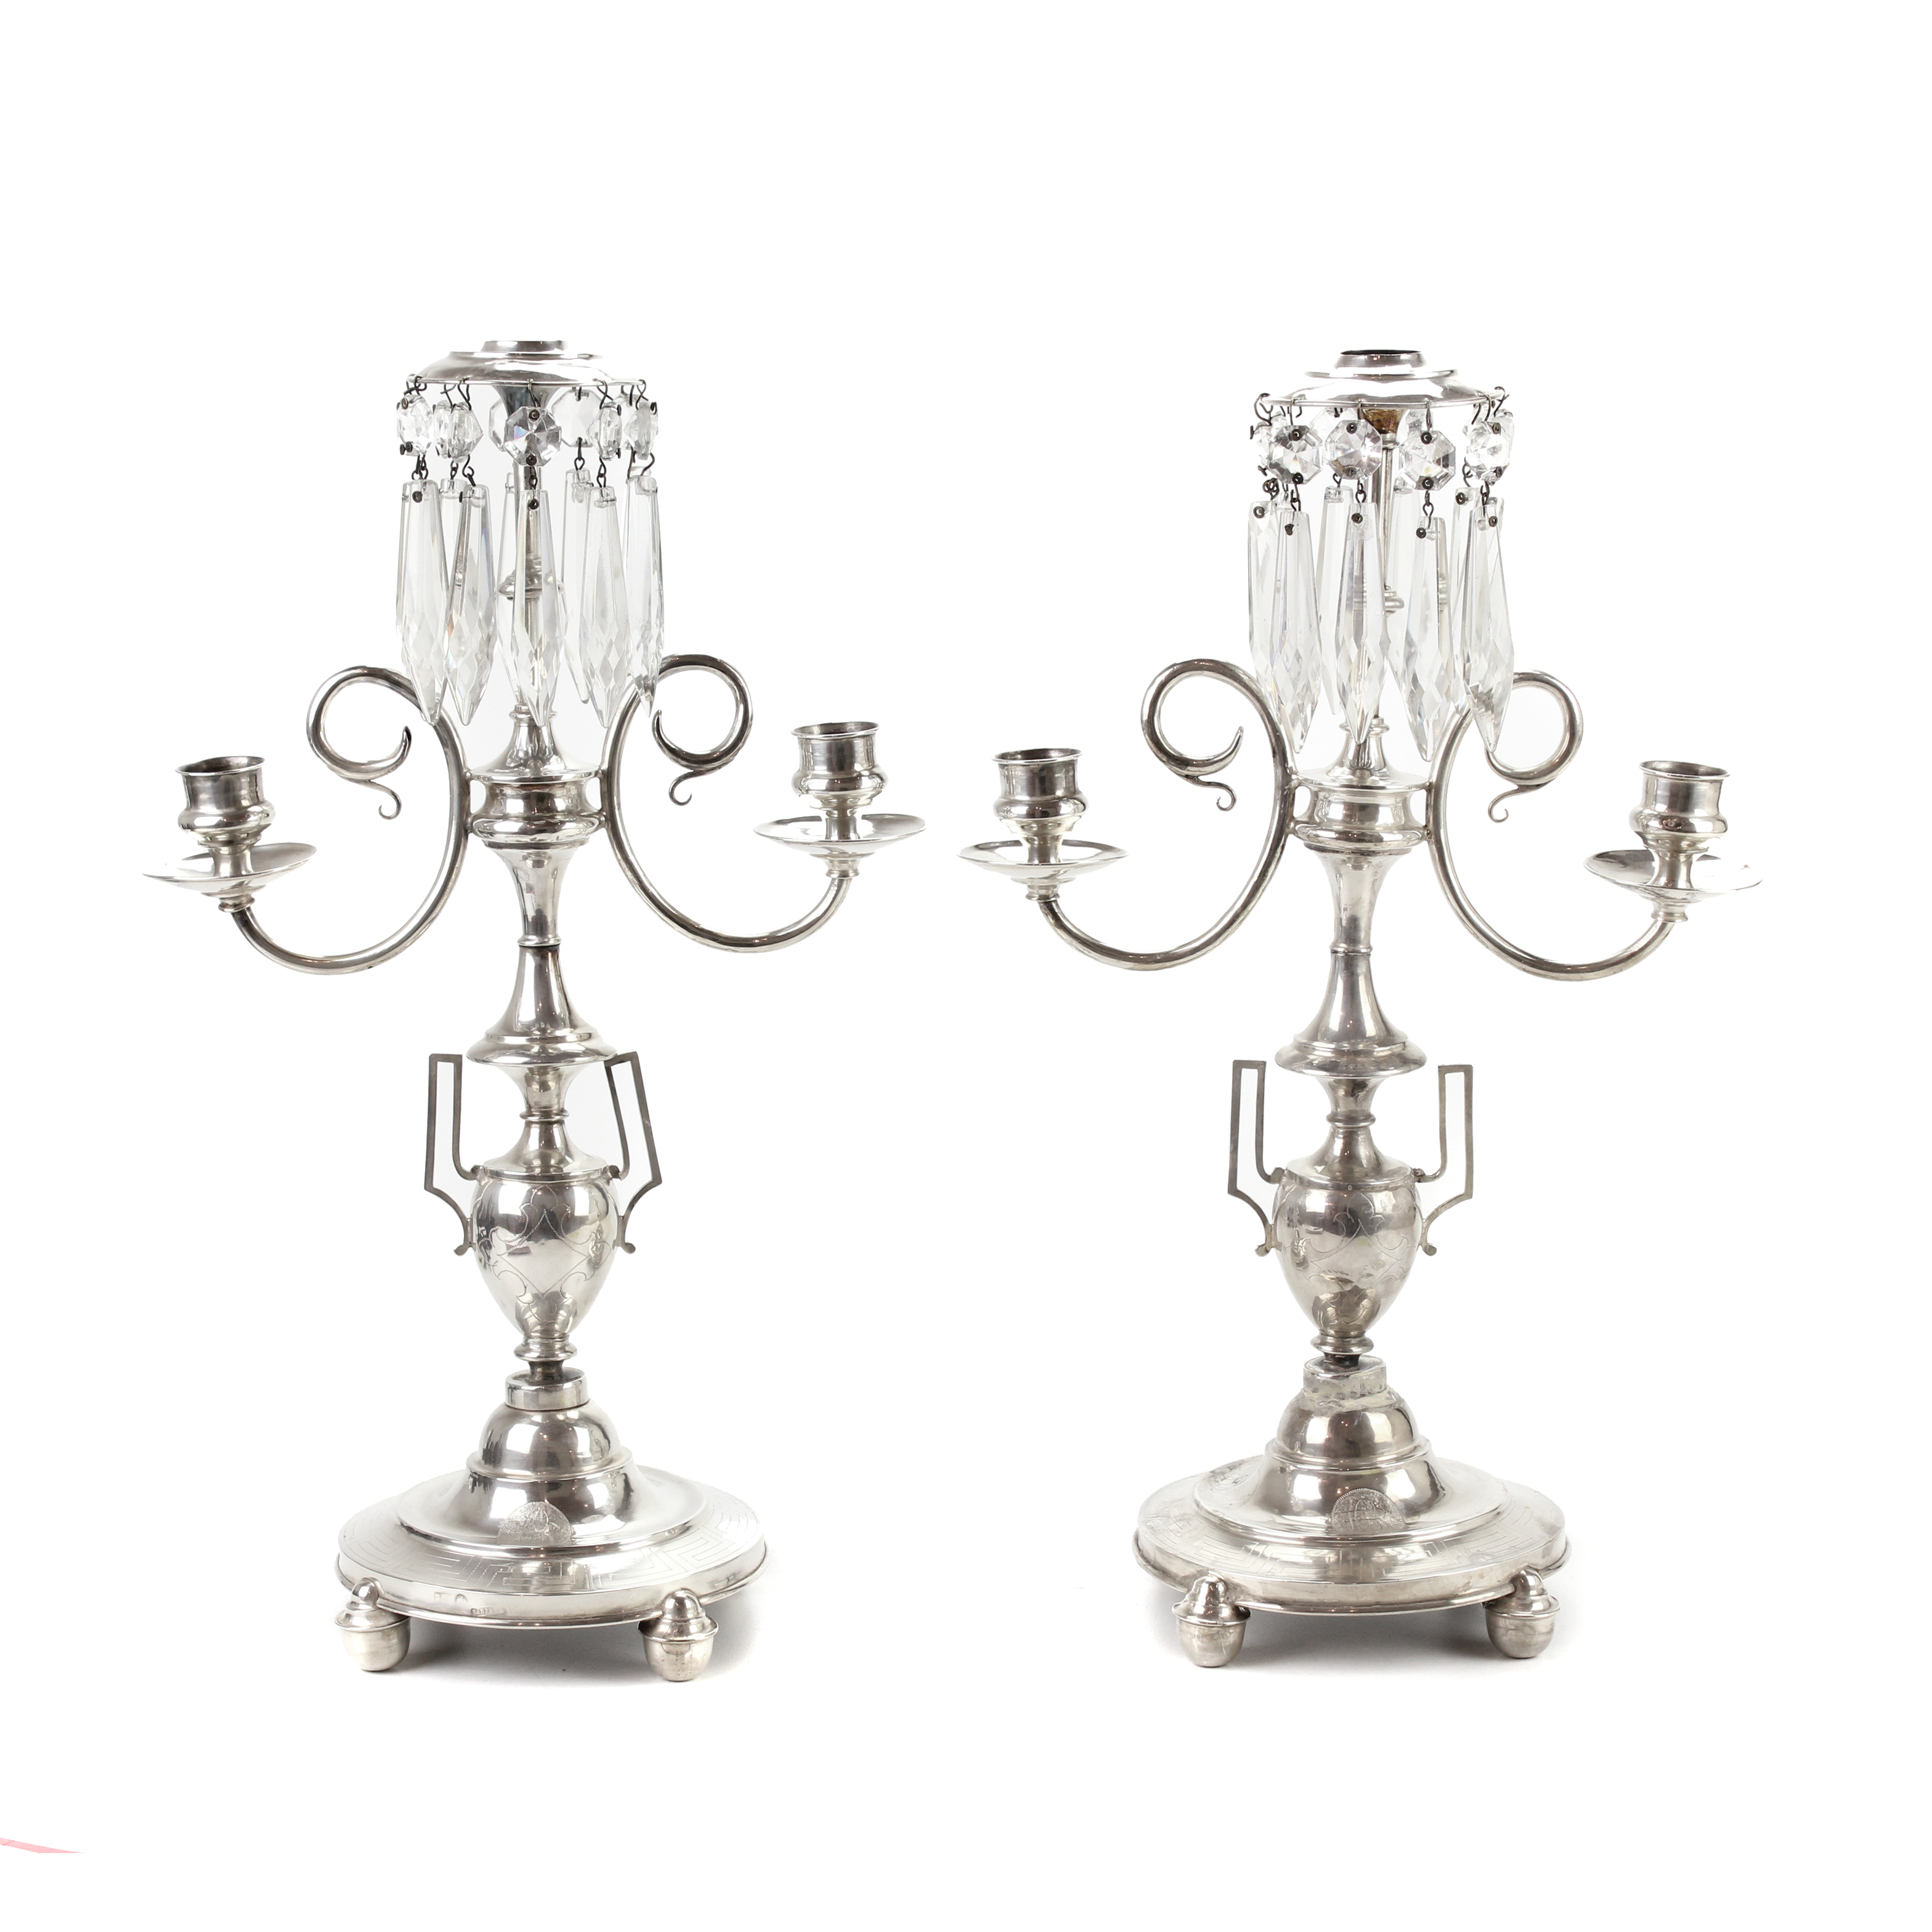 PAIR OF SILVER BARCELONA CANDELABRAS, C19th.